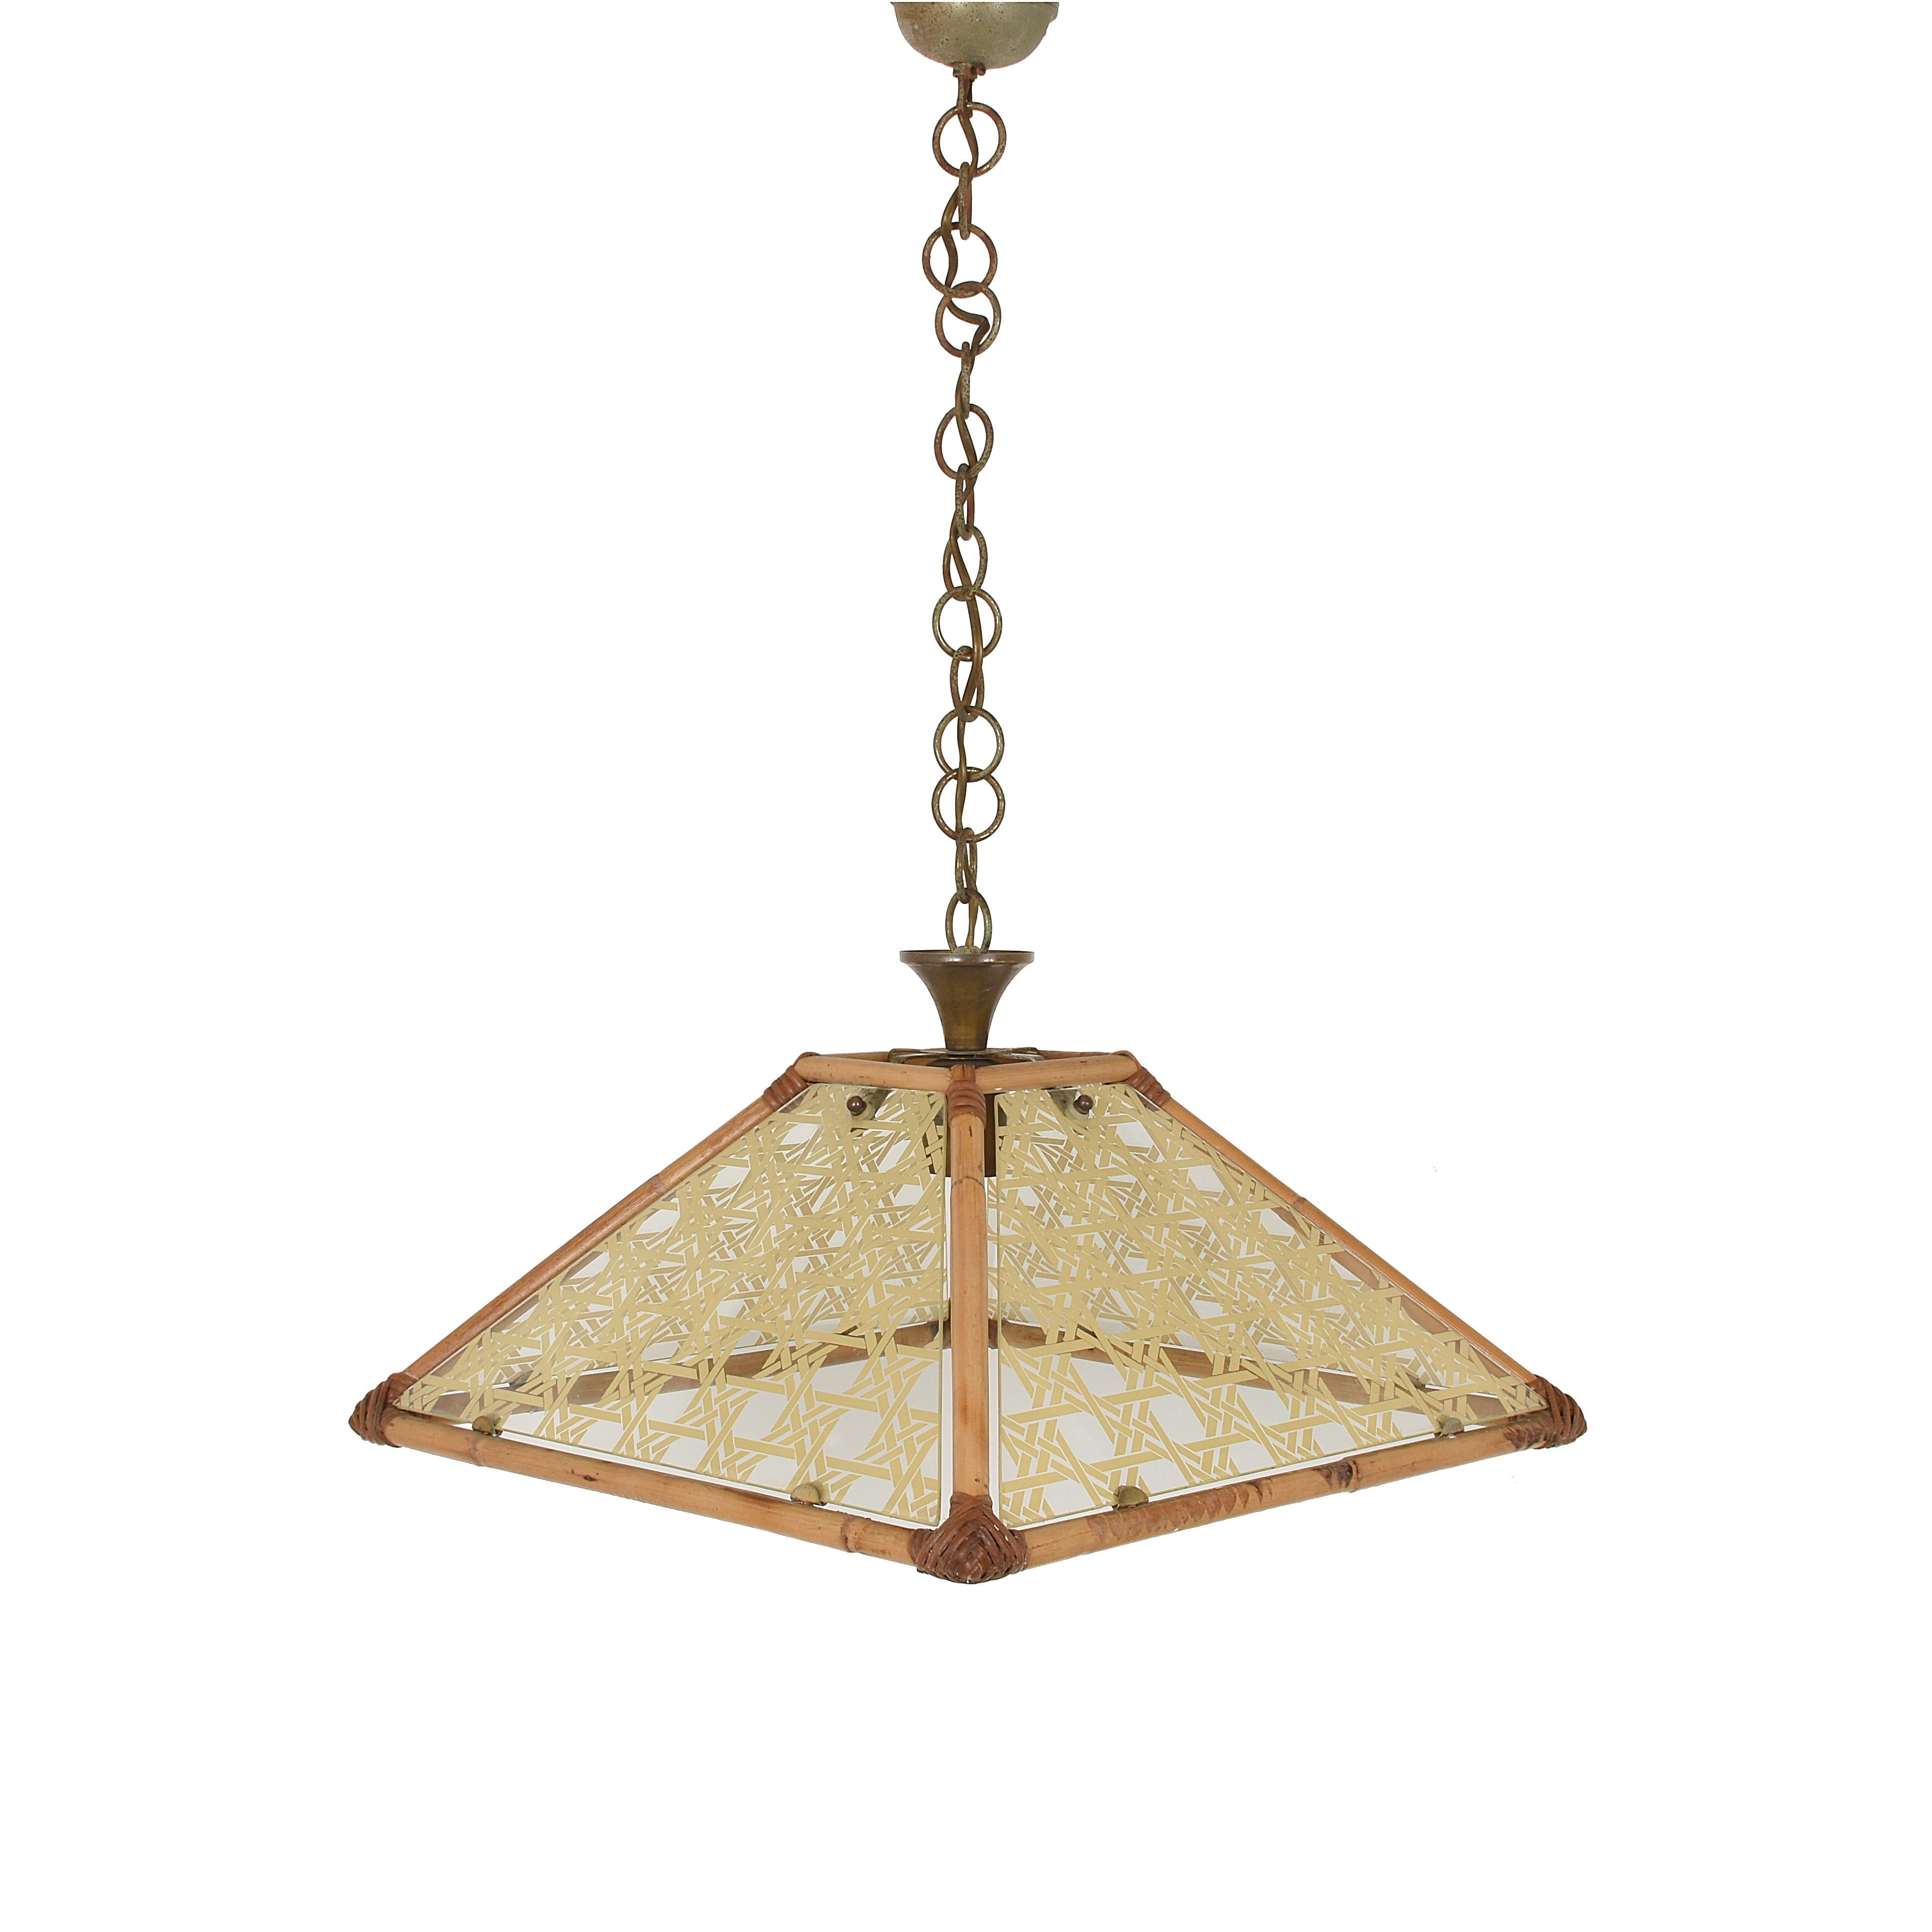 Mid-Century Modern Chandelier in Textured Glass, Rattan, Bamboo and Brass, Pendant Italy, 1970s For Sale